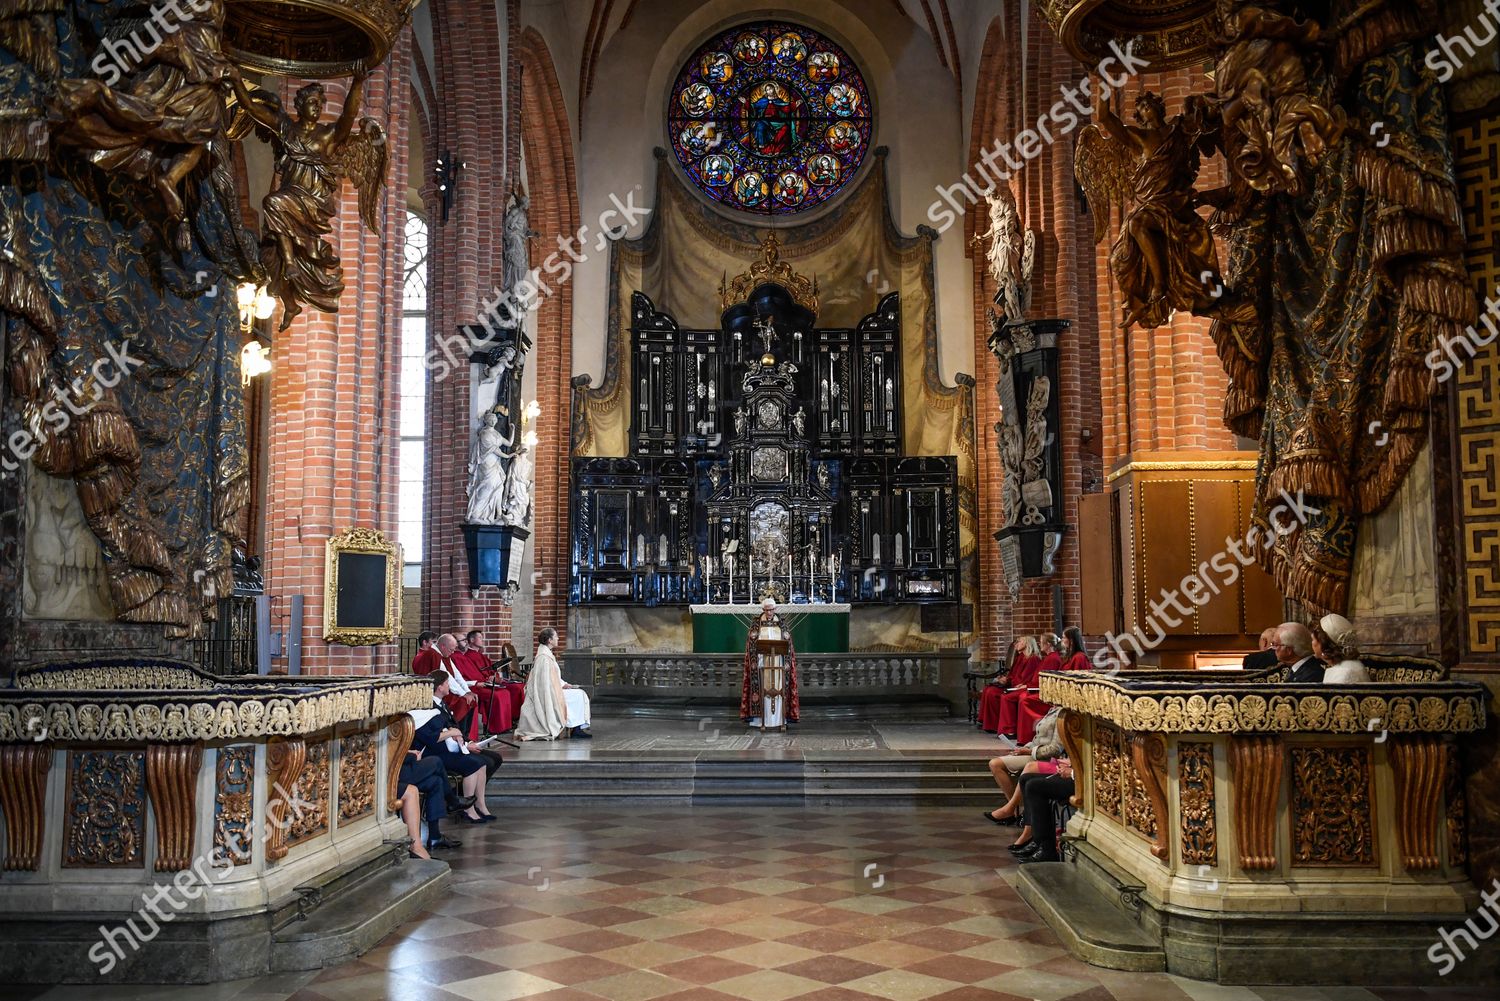 CASA REAL DE SUECIA - Página 62 Opening-of-the-parliamentary-session-stockholm-cathedral-stockholm-sweden-shutterstock-editorial-10769598a